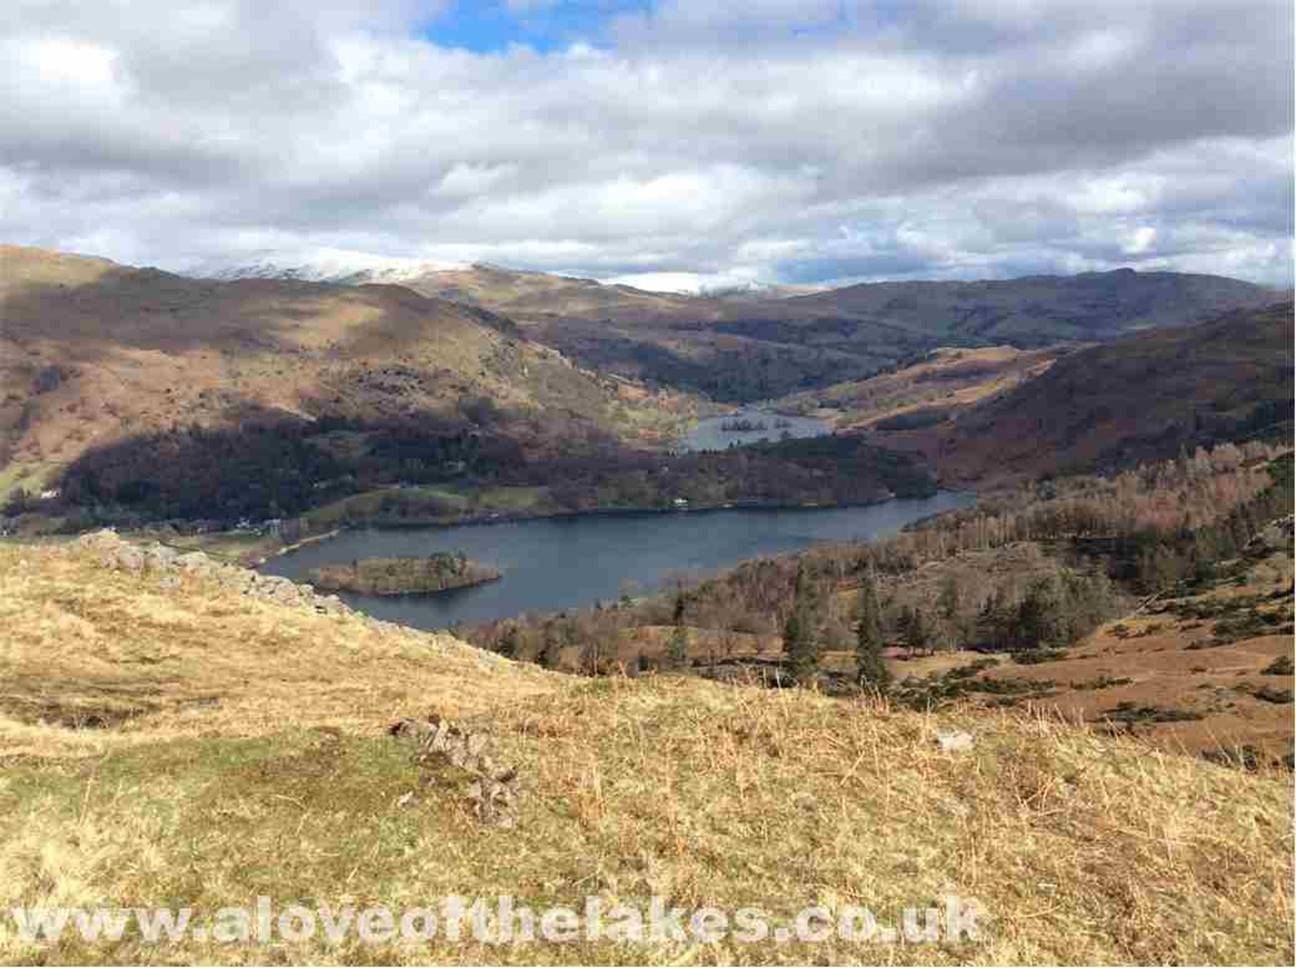 A view of Grasmere and Rydal Water on the way to the summit